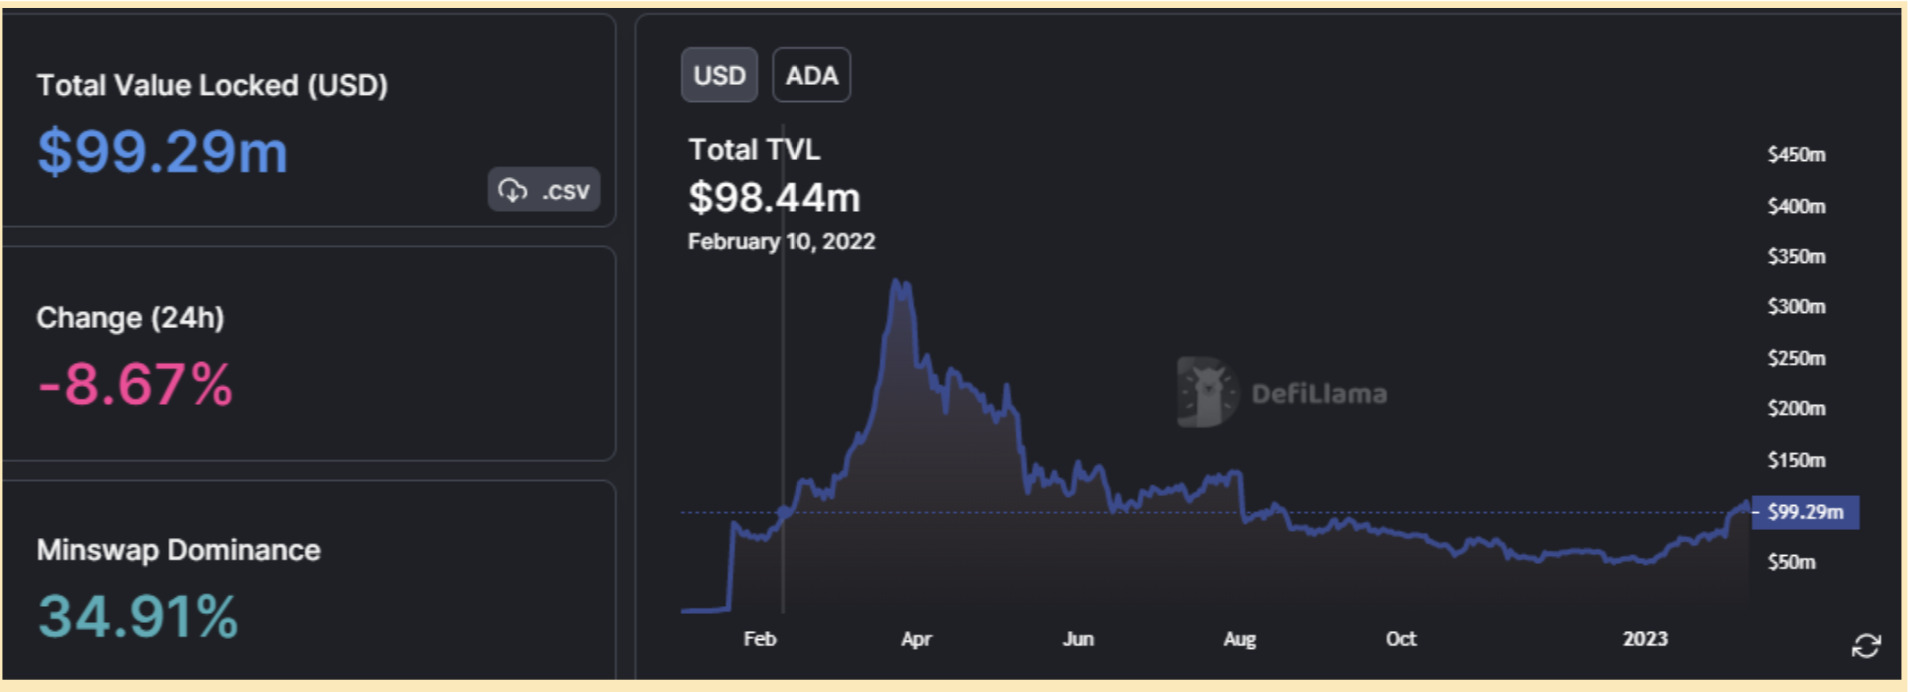 Cardano (ADA) Experiences 11% Growth in Two Weeks Leading Up to Shanghai Upgrade